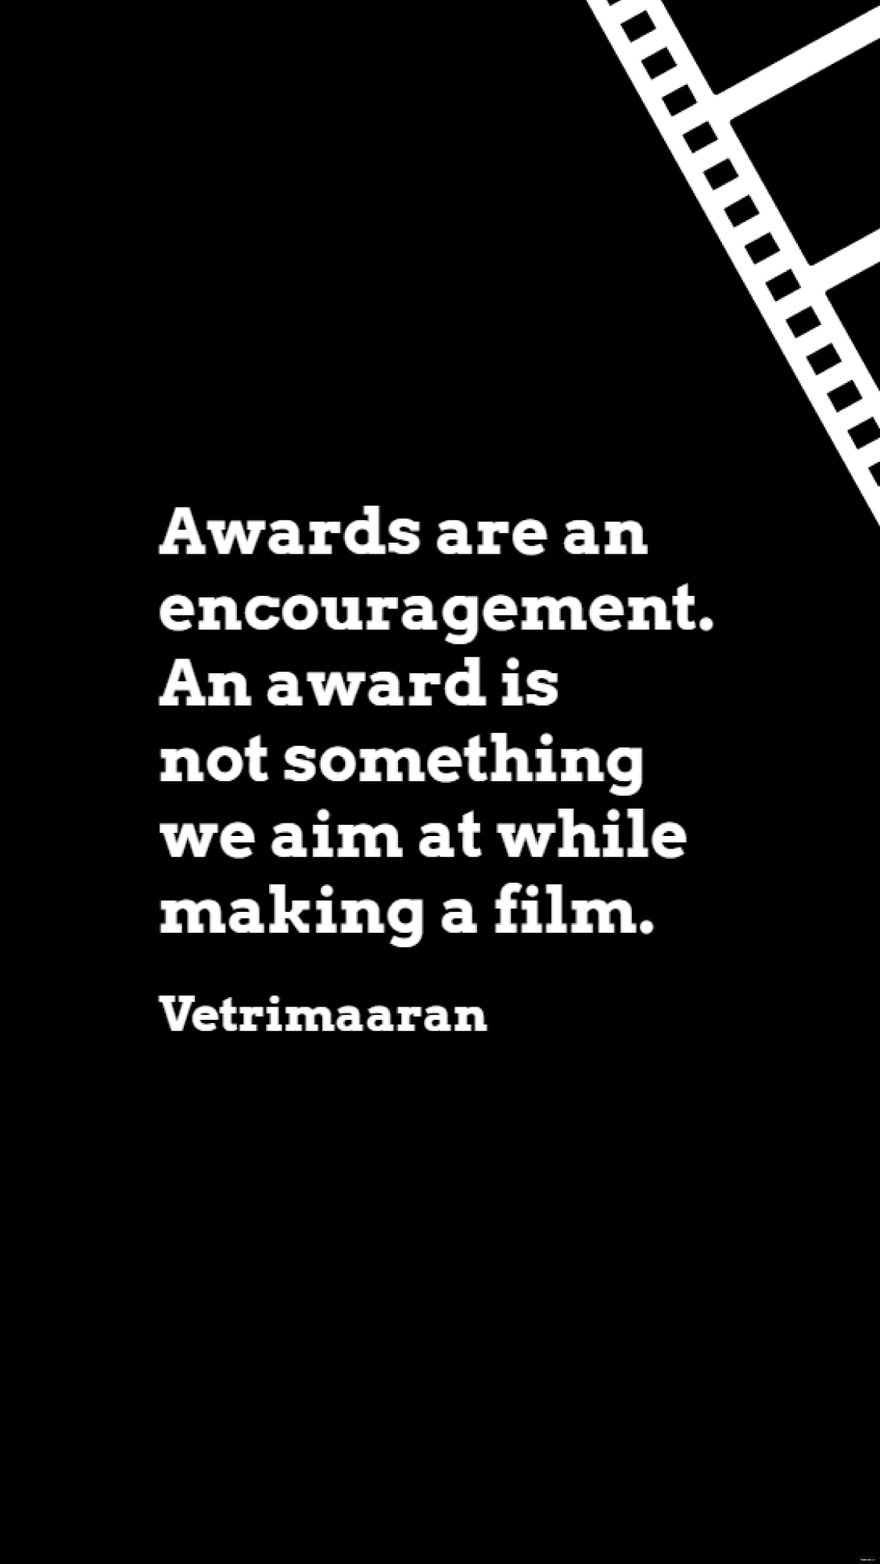 Vetrimaaran - Awards are an encouragement. An award is not something we aim at while making a film.